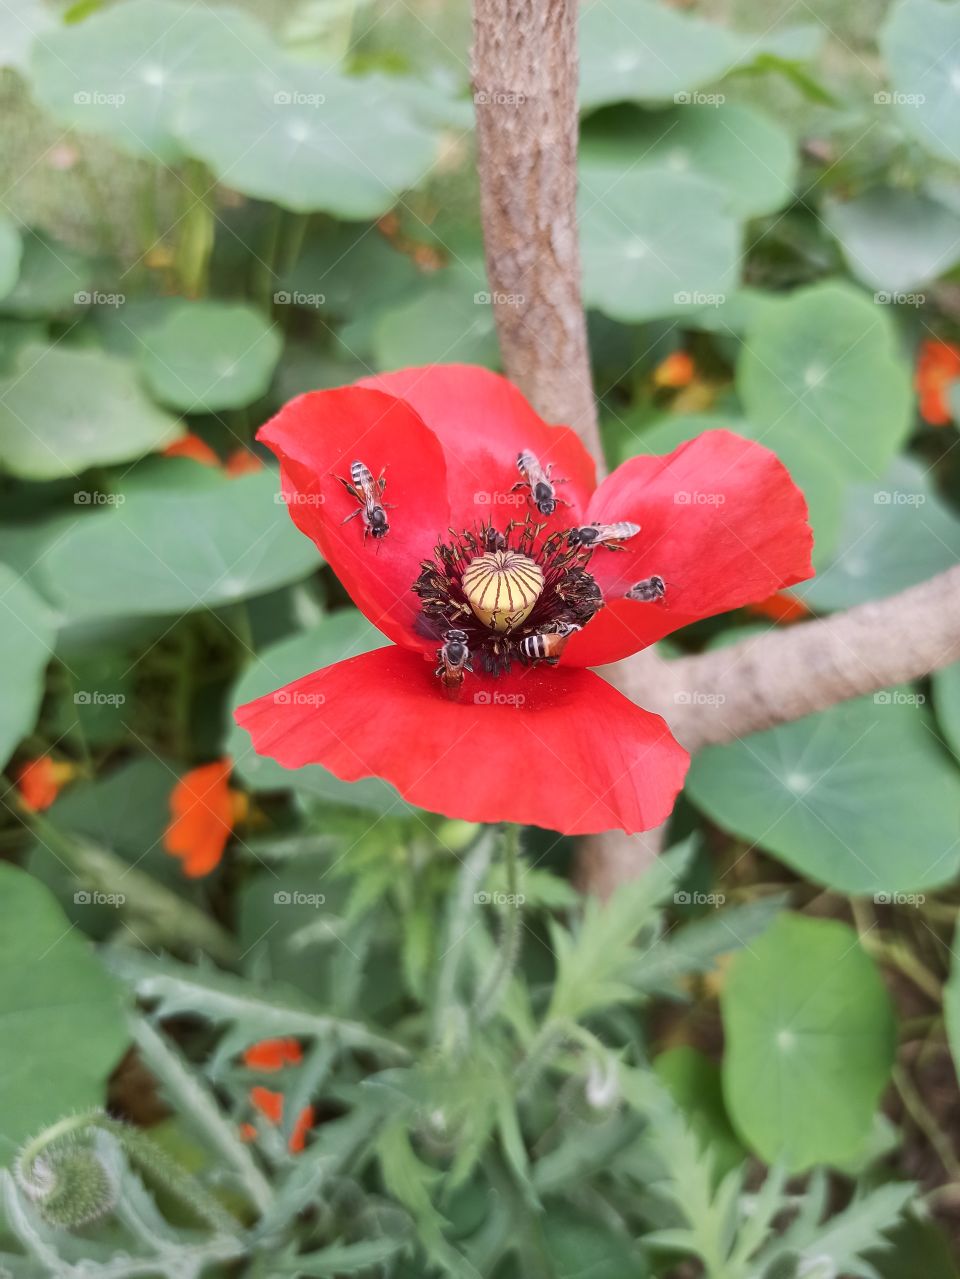 mobile click/ opium poppy/ bees collecting pollen from red poppy flower